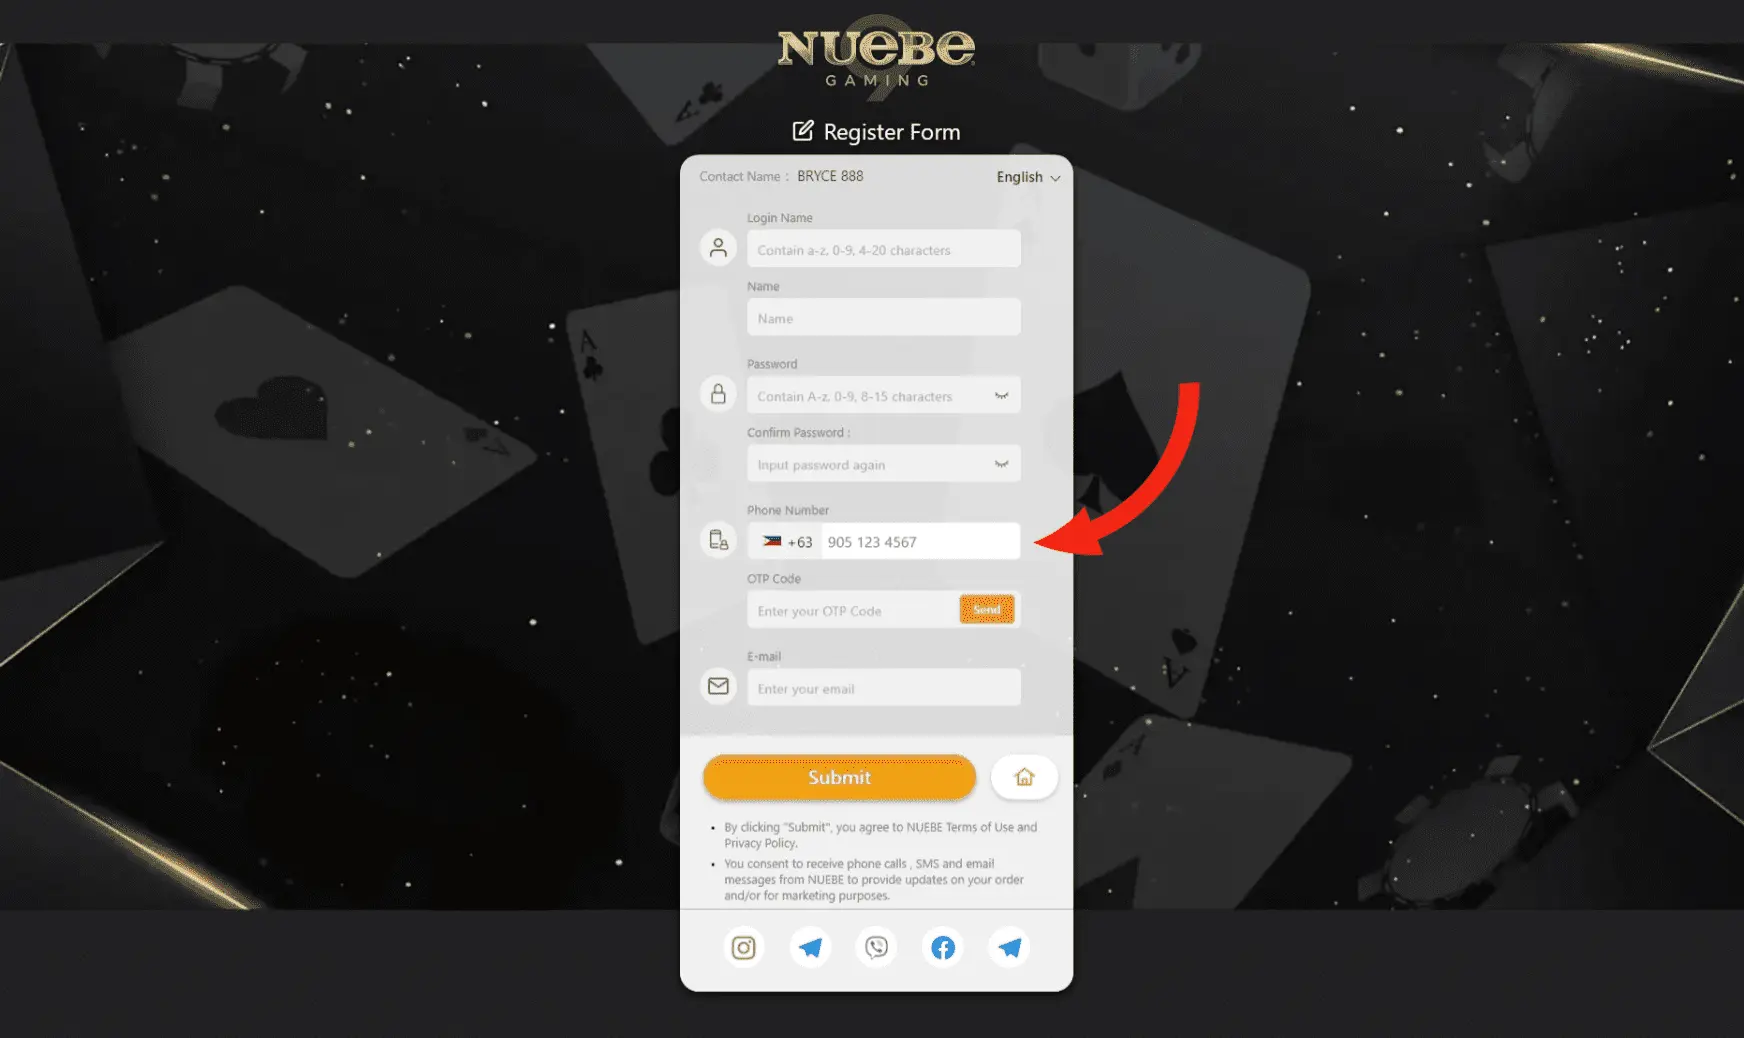 Registration form on Nuebe Gaming's website with an arrow pointing to the 'Phone Number' field for OTP verification amidst a floating card motif background.